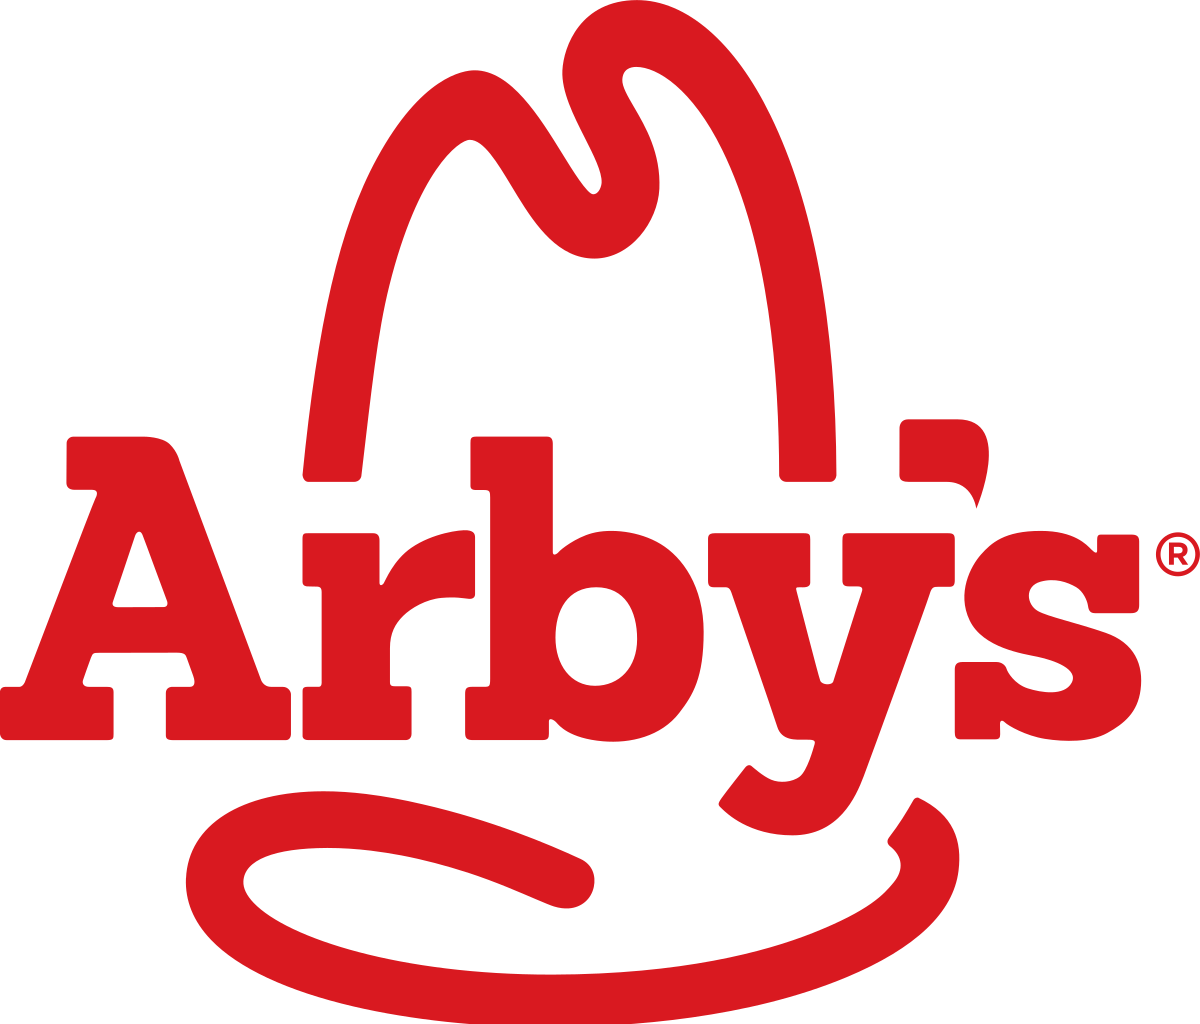 Red Fast Food Logo - Arby's